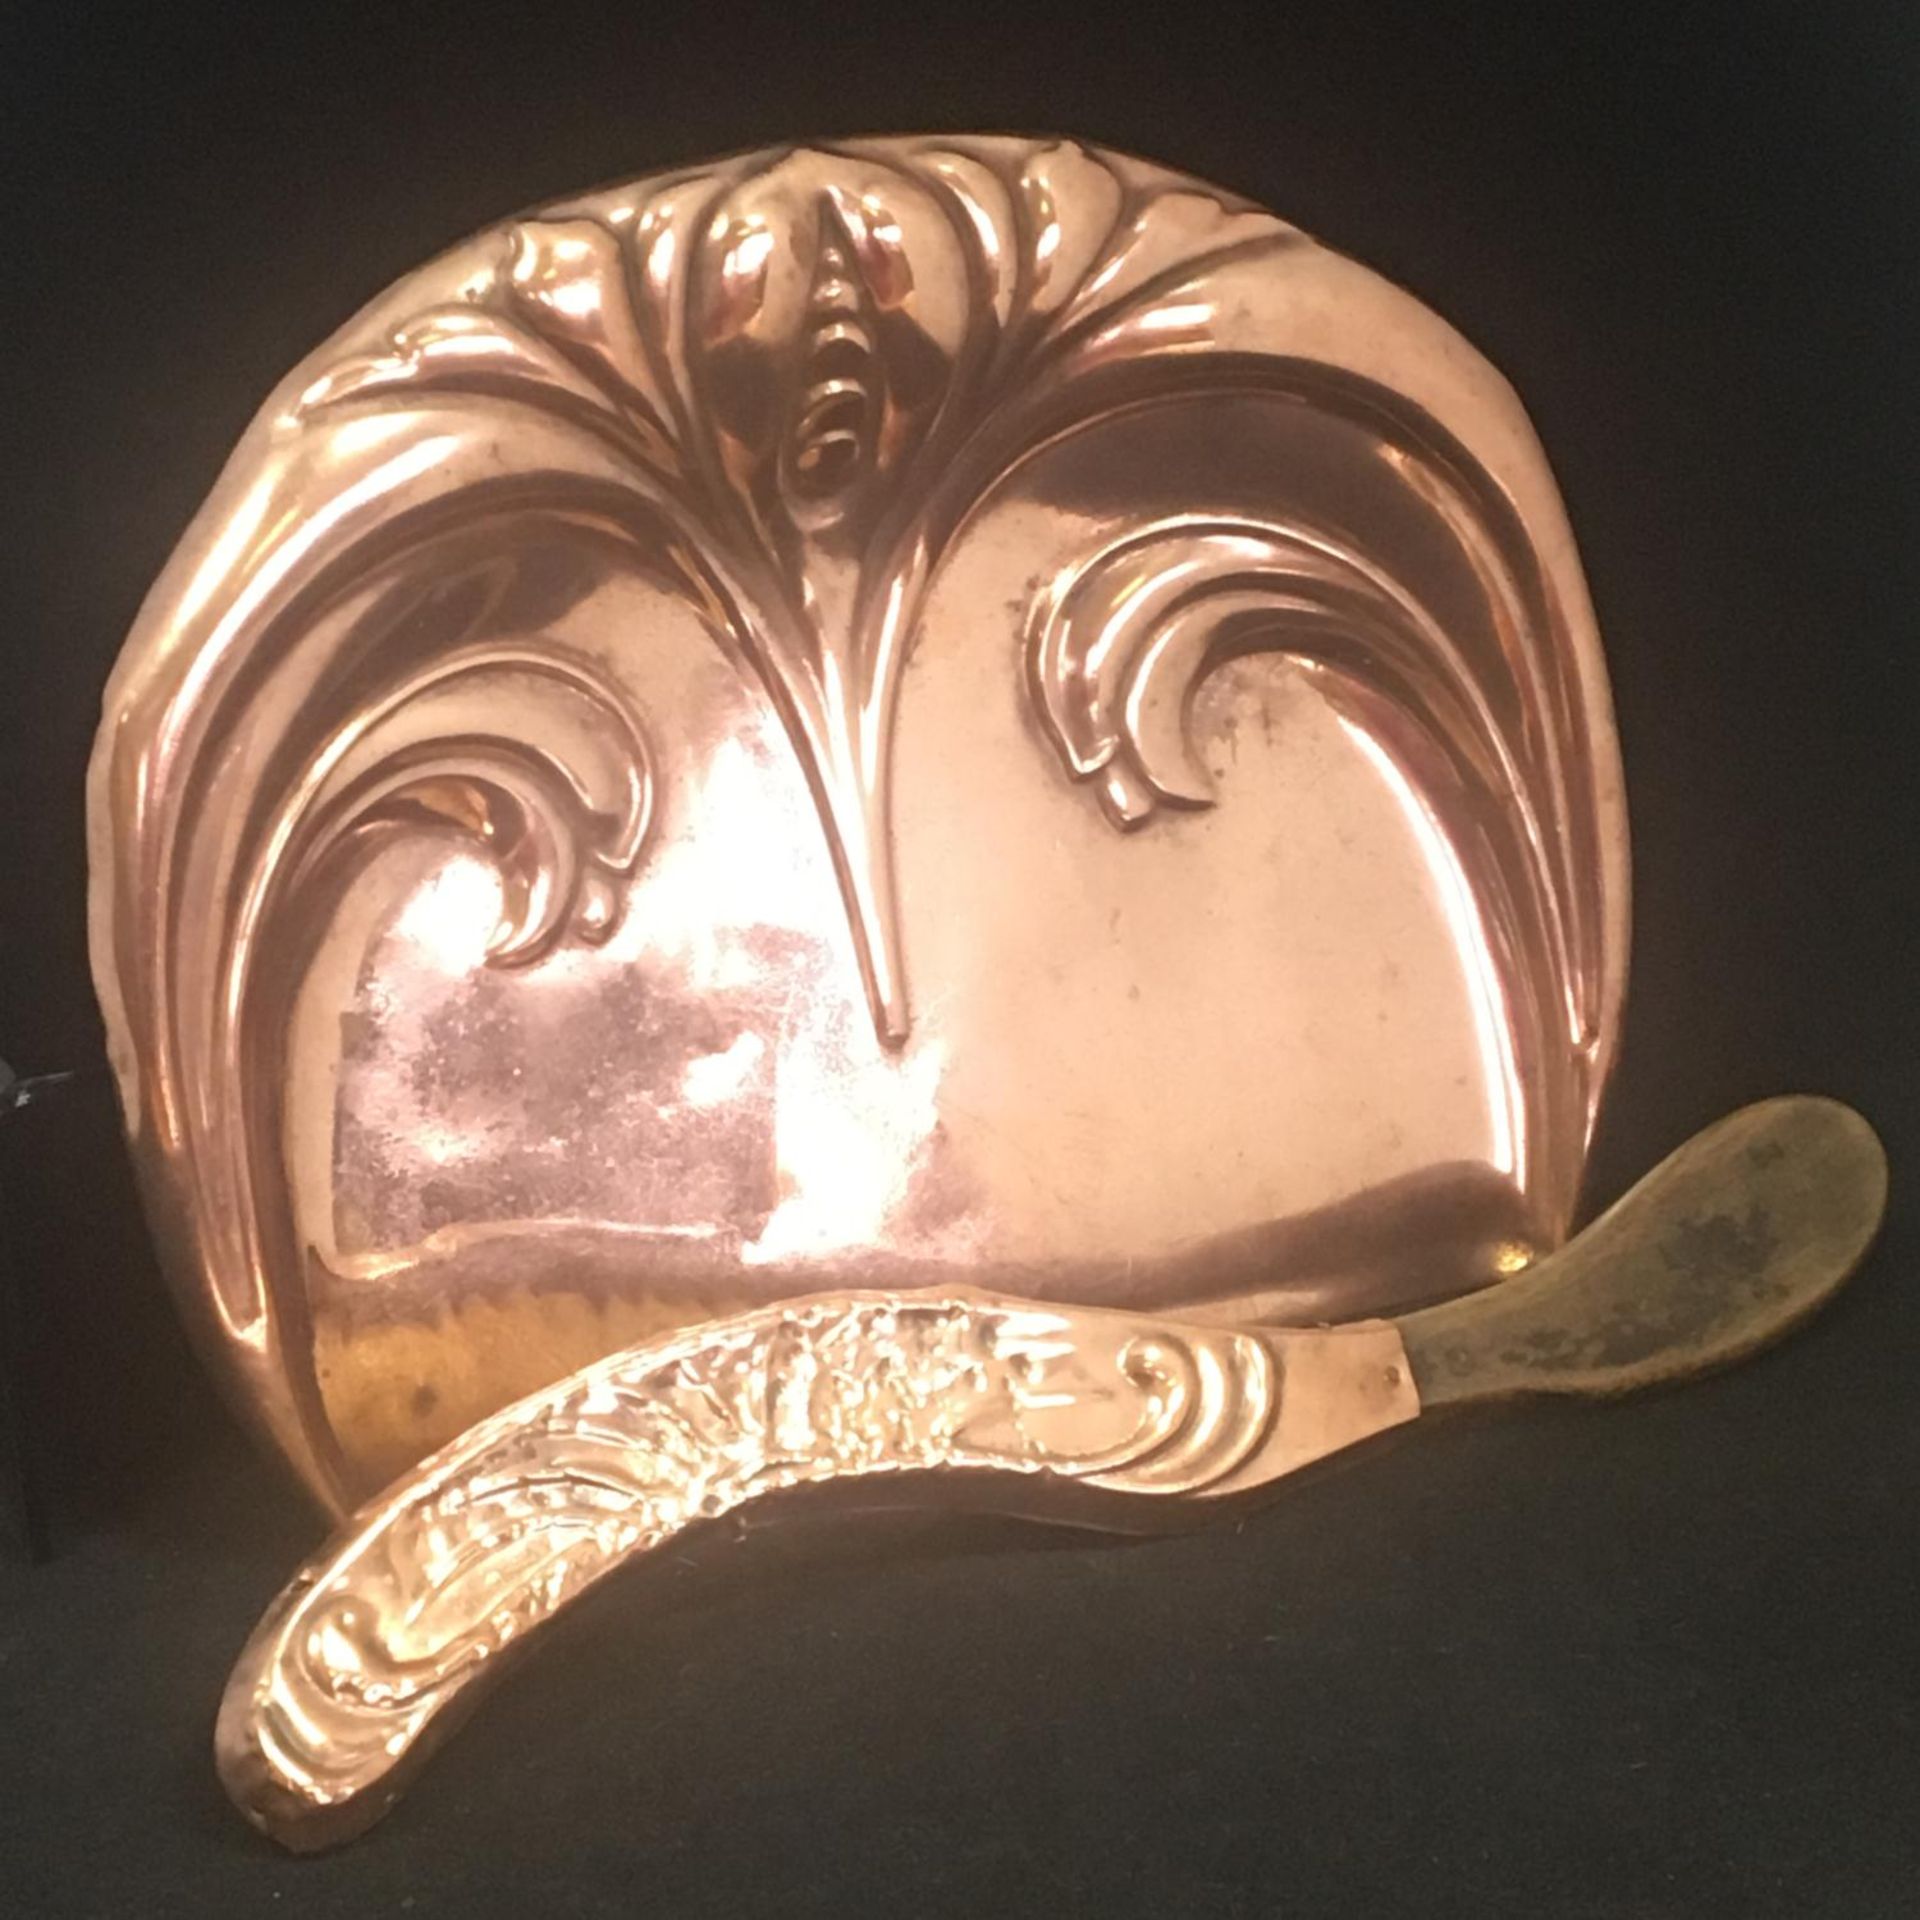 Antique Art Nouveau copper crumb tray and matching brush set c1905. Superb period design by